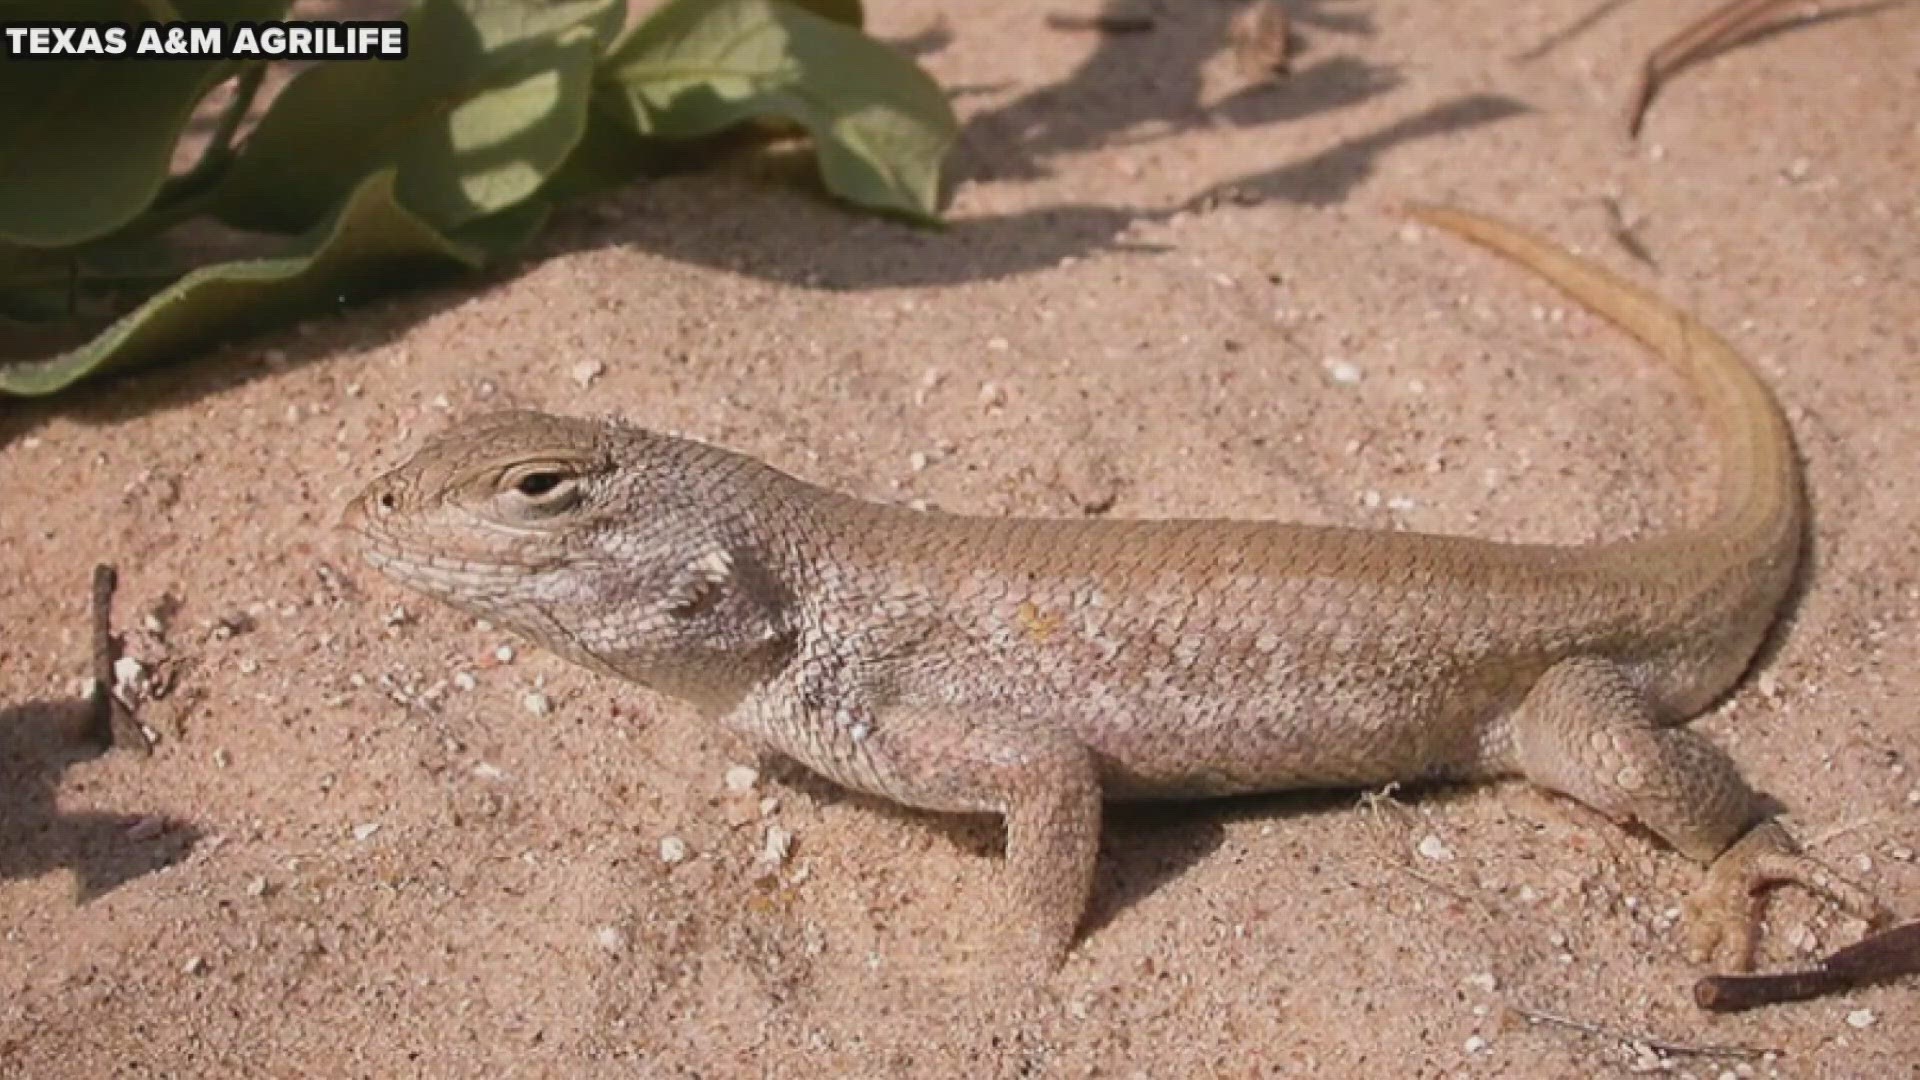 U.S. Senator Kevin Sparks wrote a letter to the director of U.S. Fish and Wildlife on why he opposes listing the lizard as endangered.